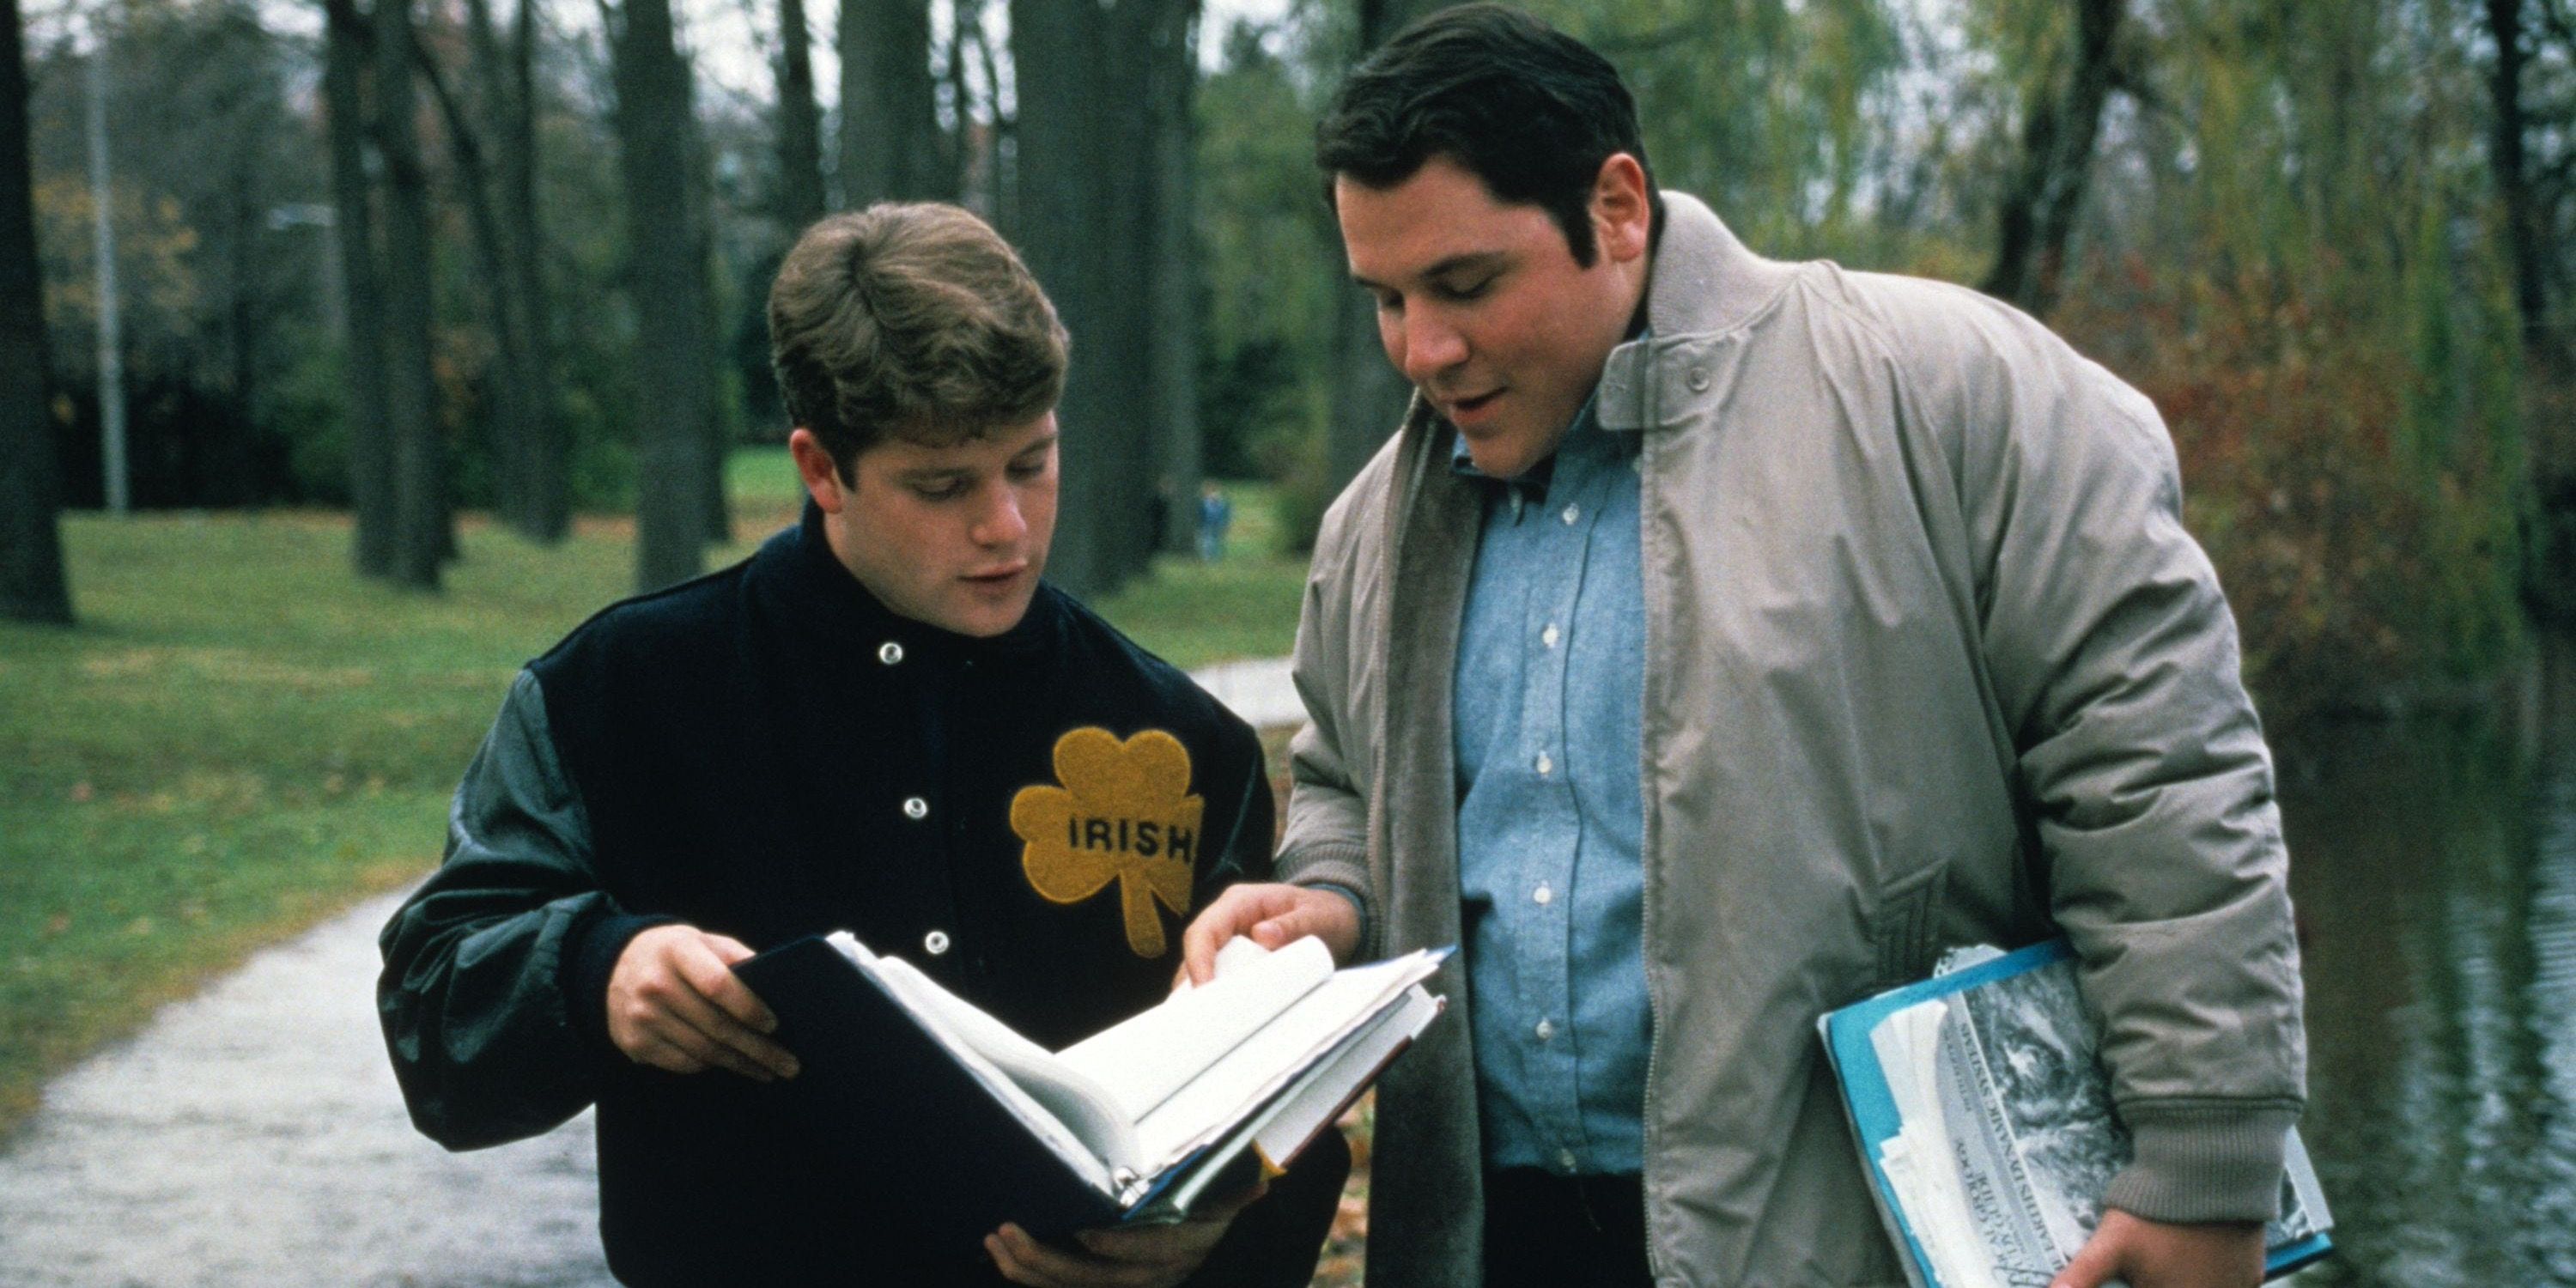 Sean astin and Jon Favreau standing next to each other in Rudy